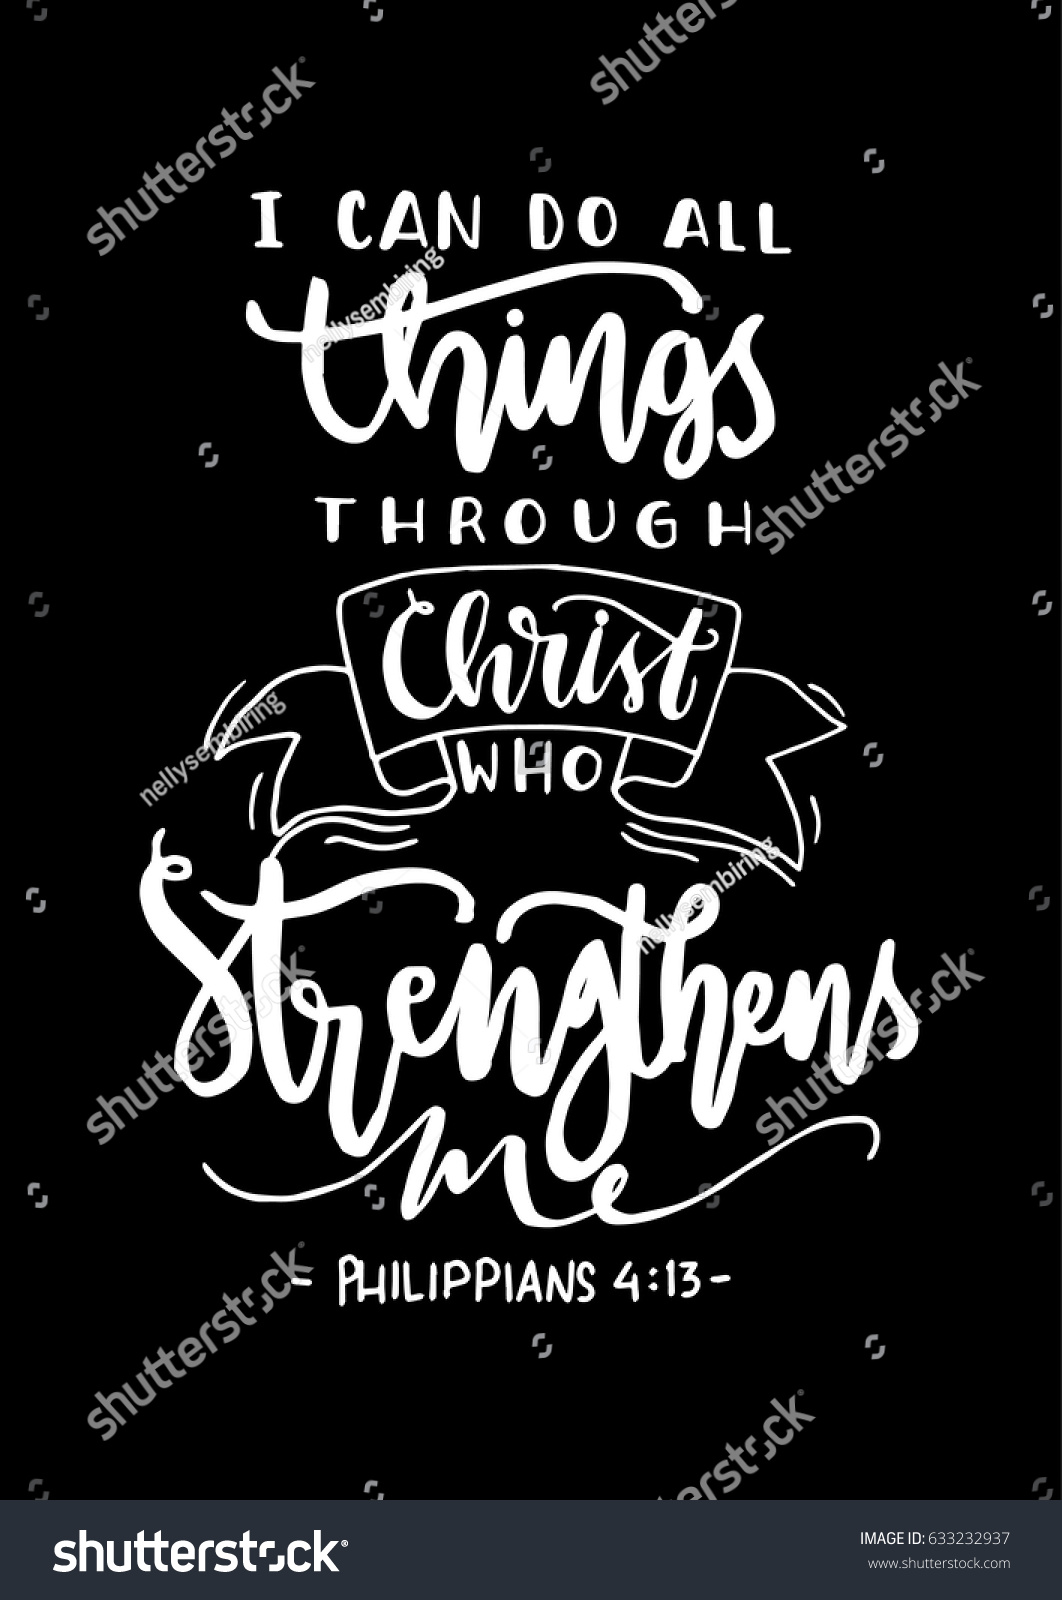 SVG of I Can Do All Things Through Christ Who Strengthens Me on black Background. Bible Quote. Modern Calligraphy. Handwritten Inspirational motivational quote. svg